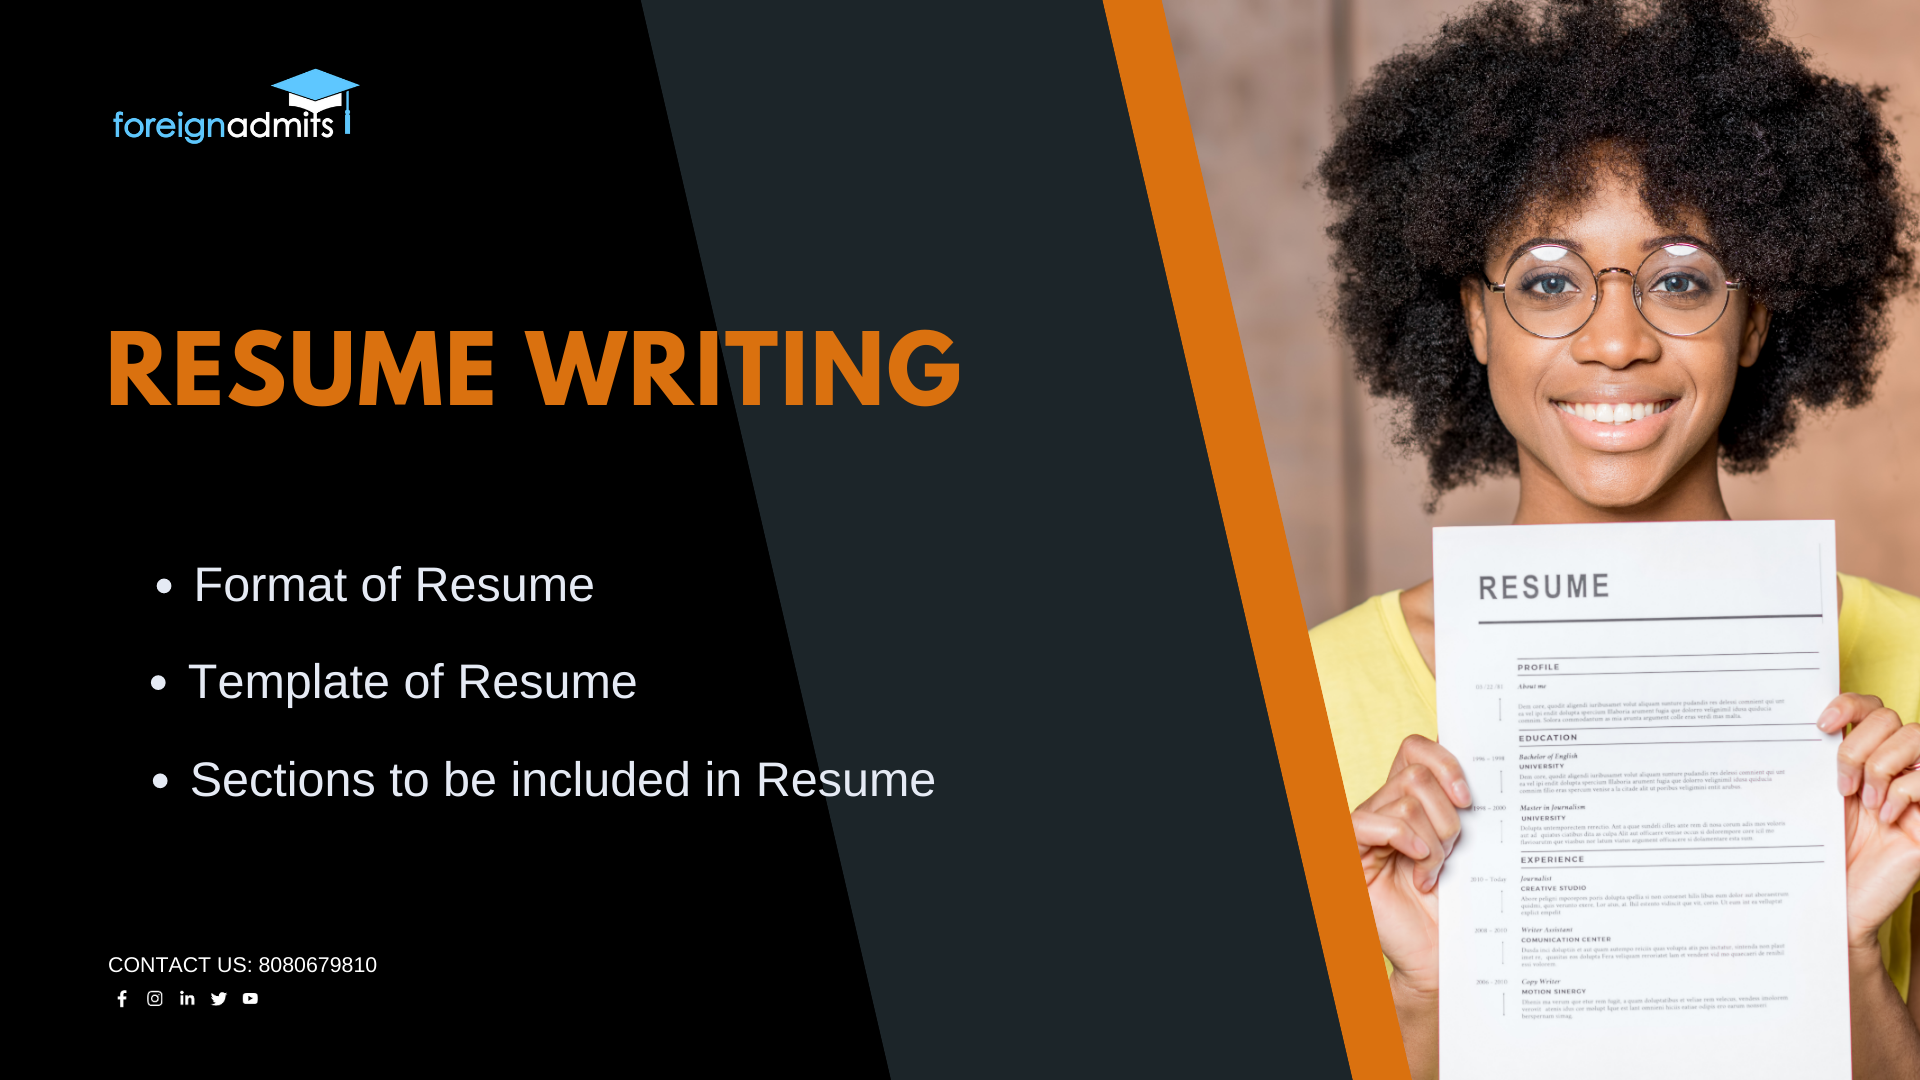 Resume writing – All You Need to Know!